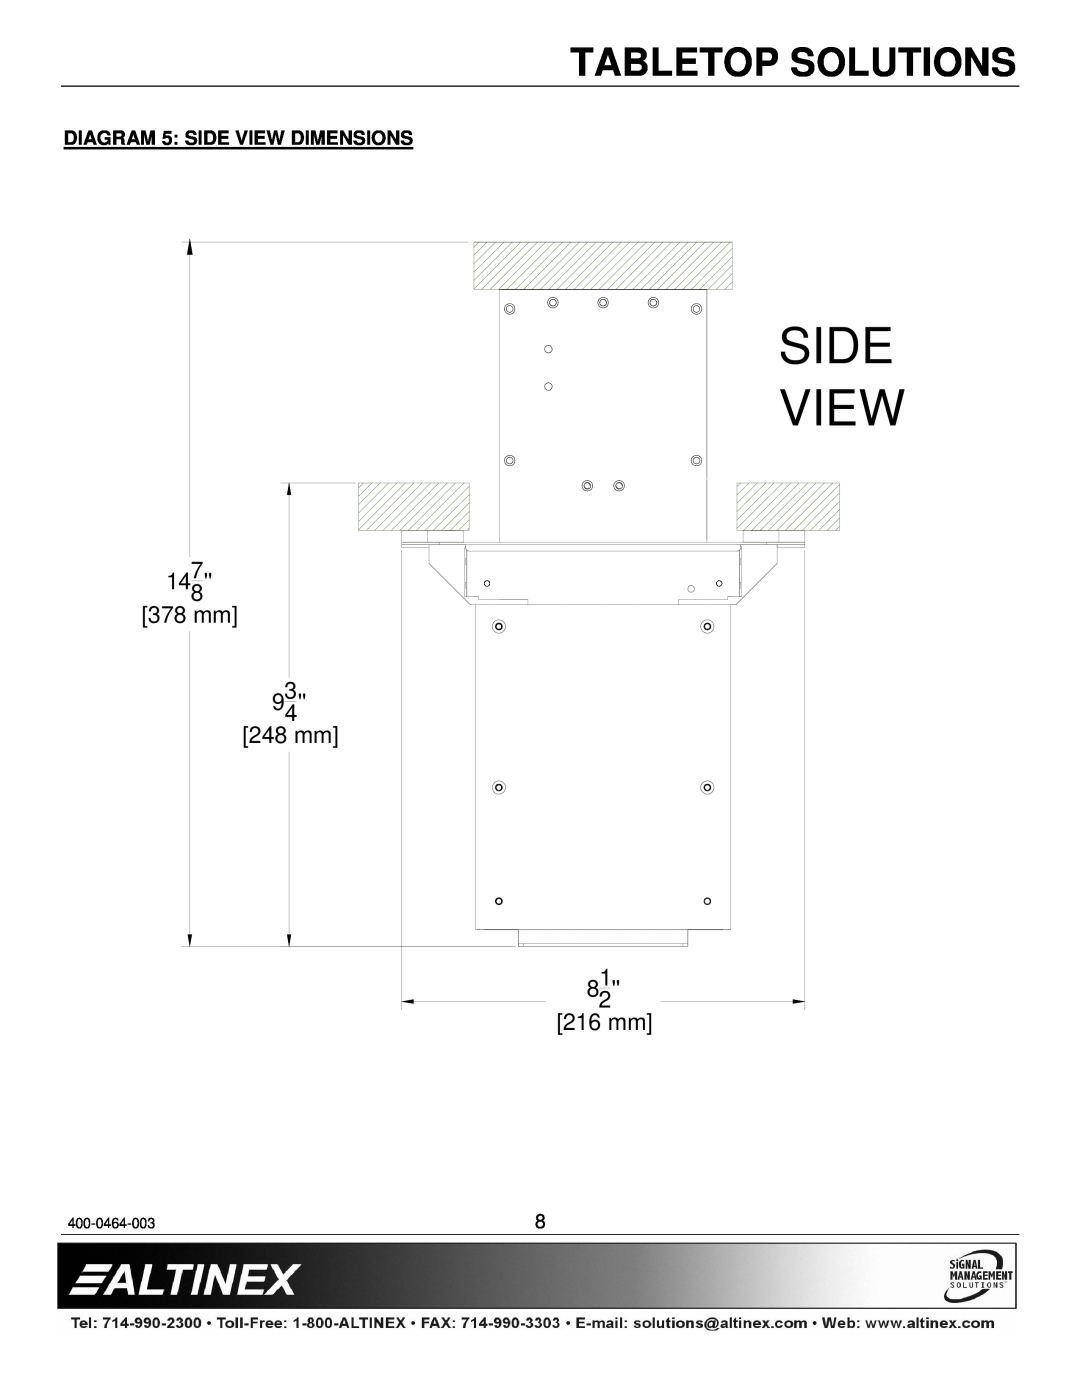 Altinex PNP547, PNP527C Side, View, Tabletop Solutions, 1478 378 mm 934 248 mm 821 216 mm, DIAGRAM 5 SIDE VIEW DIMENSIONS 